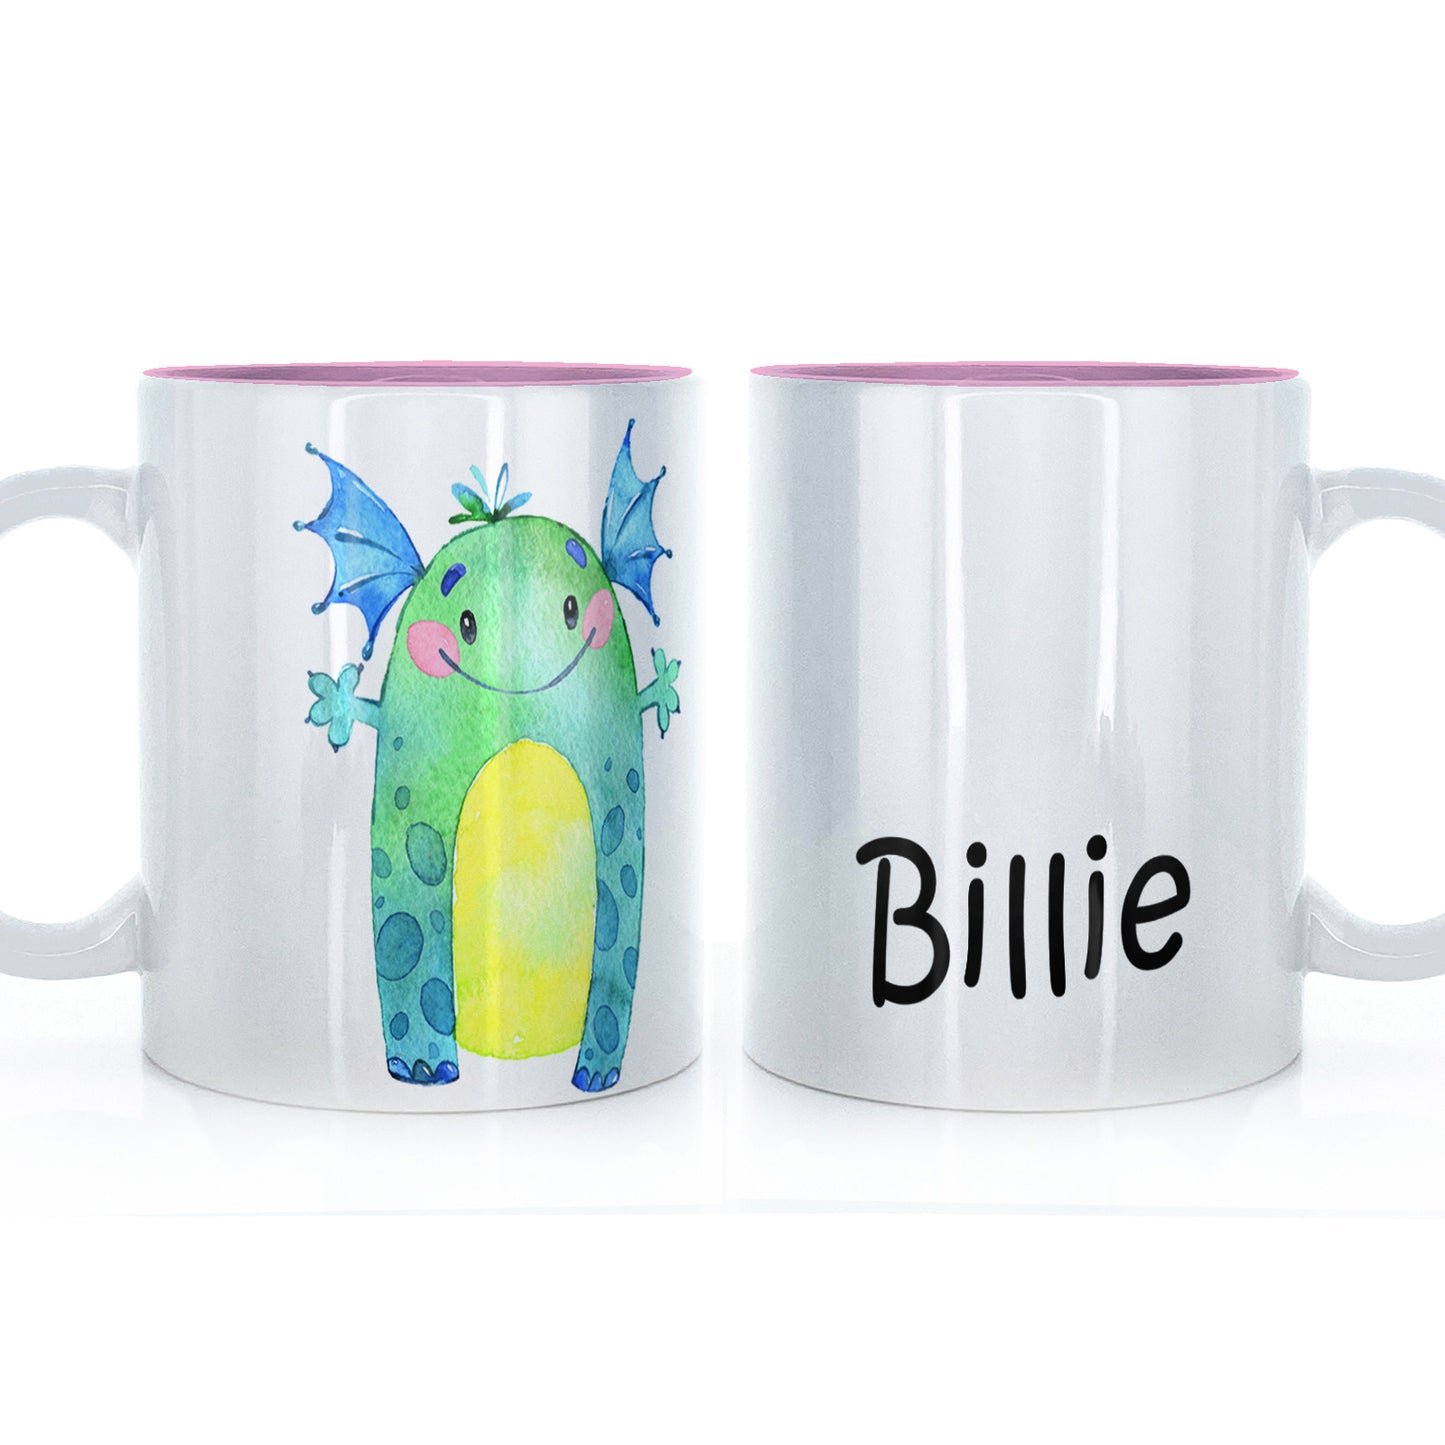 Personalised Mug with Childish Text and Green Winged Monster